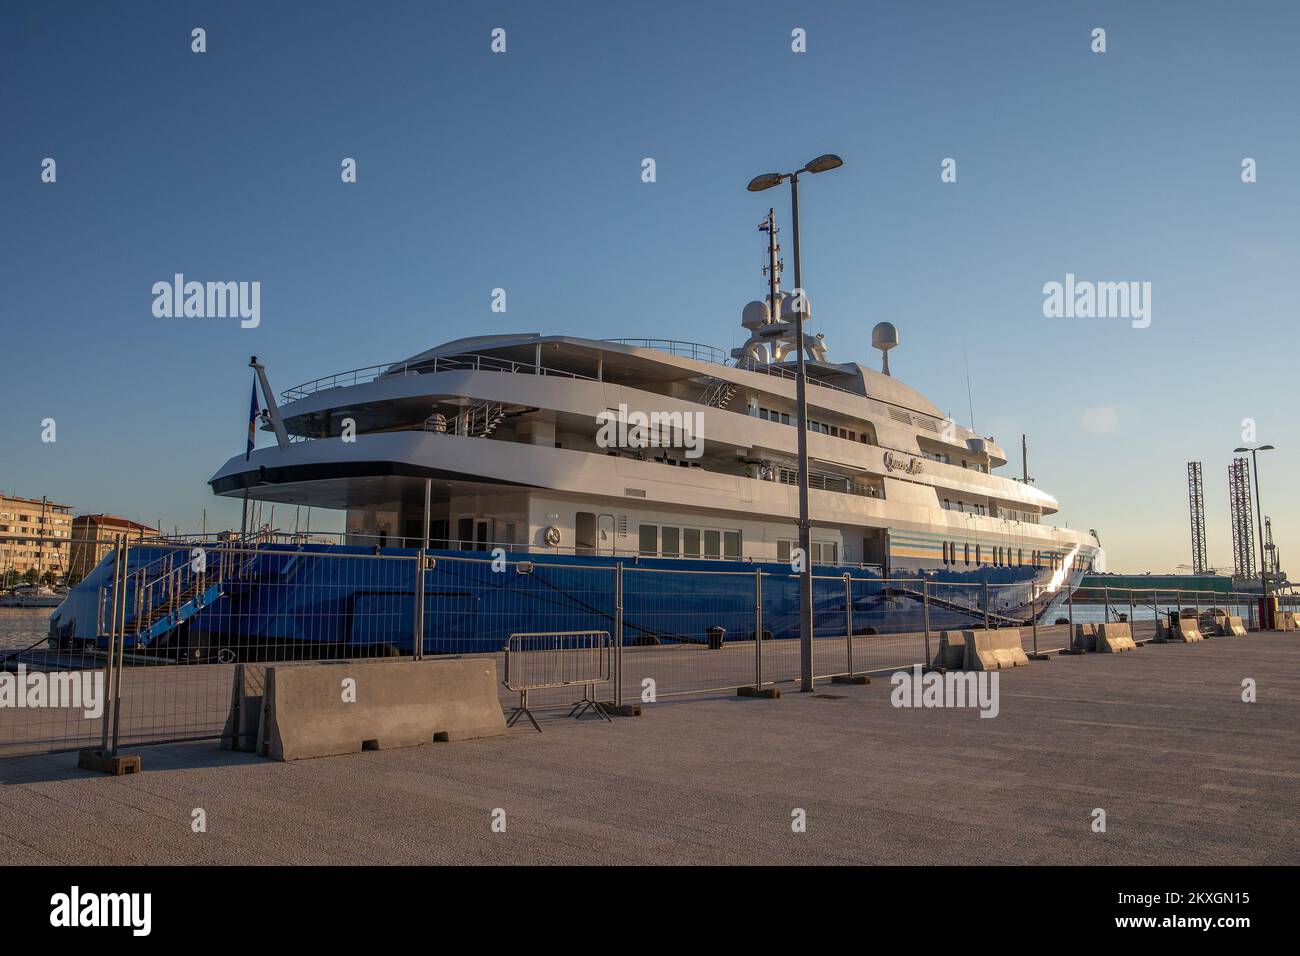 Photo taken on July 6, 2020 shows a yacht Queen Miri in Port of Pula, in Pula, Croatia. Yacht is owned by billionaire Sheldon Adelson who is American business magnate, investor, philanthropist, and political donor. He is the founder, chairman and chief executive officer of Las Vegas Sands Corporation, which owns the Marina Bay Sands in Singapore, and the parent company of Venetian Macao Limited, which operates The Venetian Resort Hotel Casino and the Sands Expo and Convention Center. He owns the Israeli daily newspaper Israel Hayom, Makor Rishon and the American daily newspaper Las Vegas Revie Stock Photo